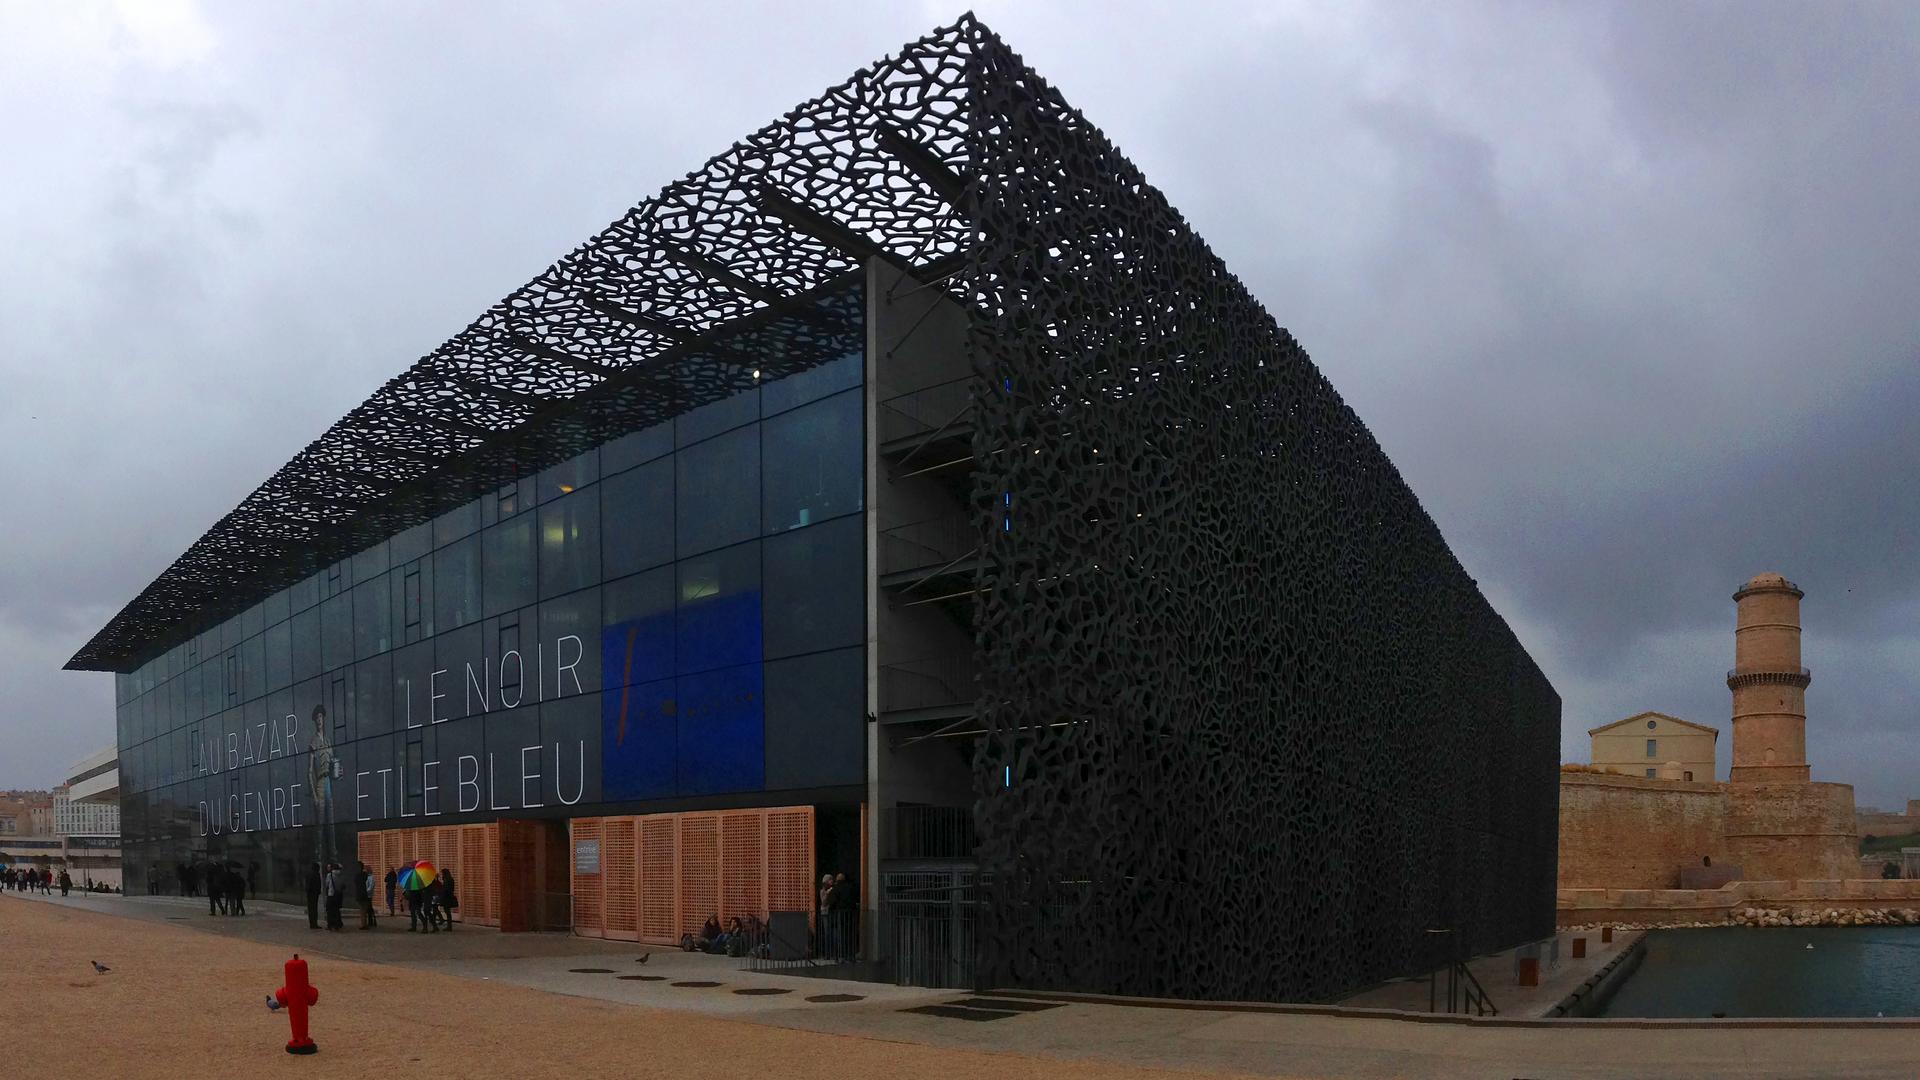 Marseille was Europe's Capital of Culture in 2013, receiving hundreds of millions of dollars from the European Union to boost the arts.  The new Museum of Mediterranean and European Civilizations was the city's center piece.  